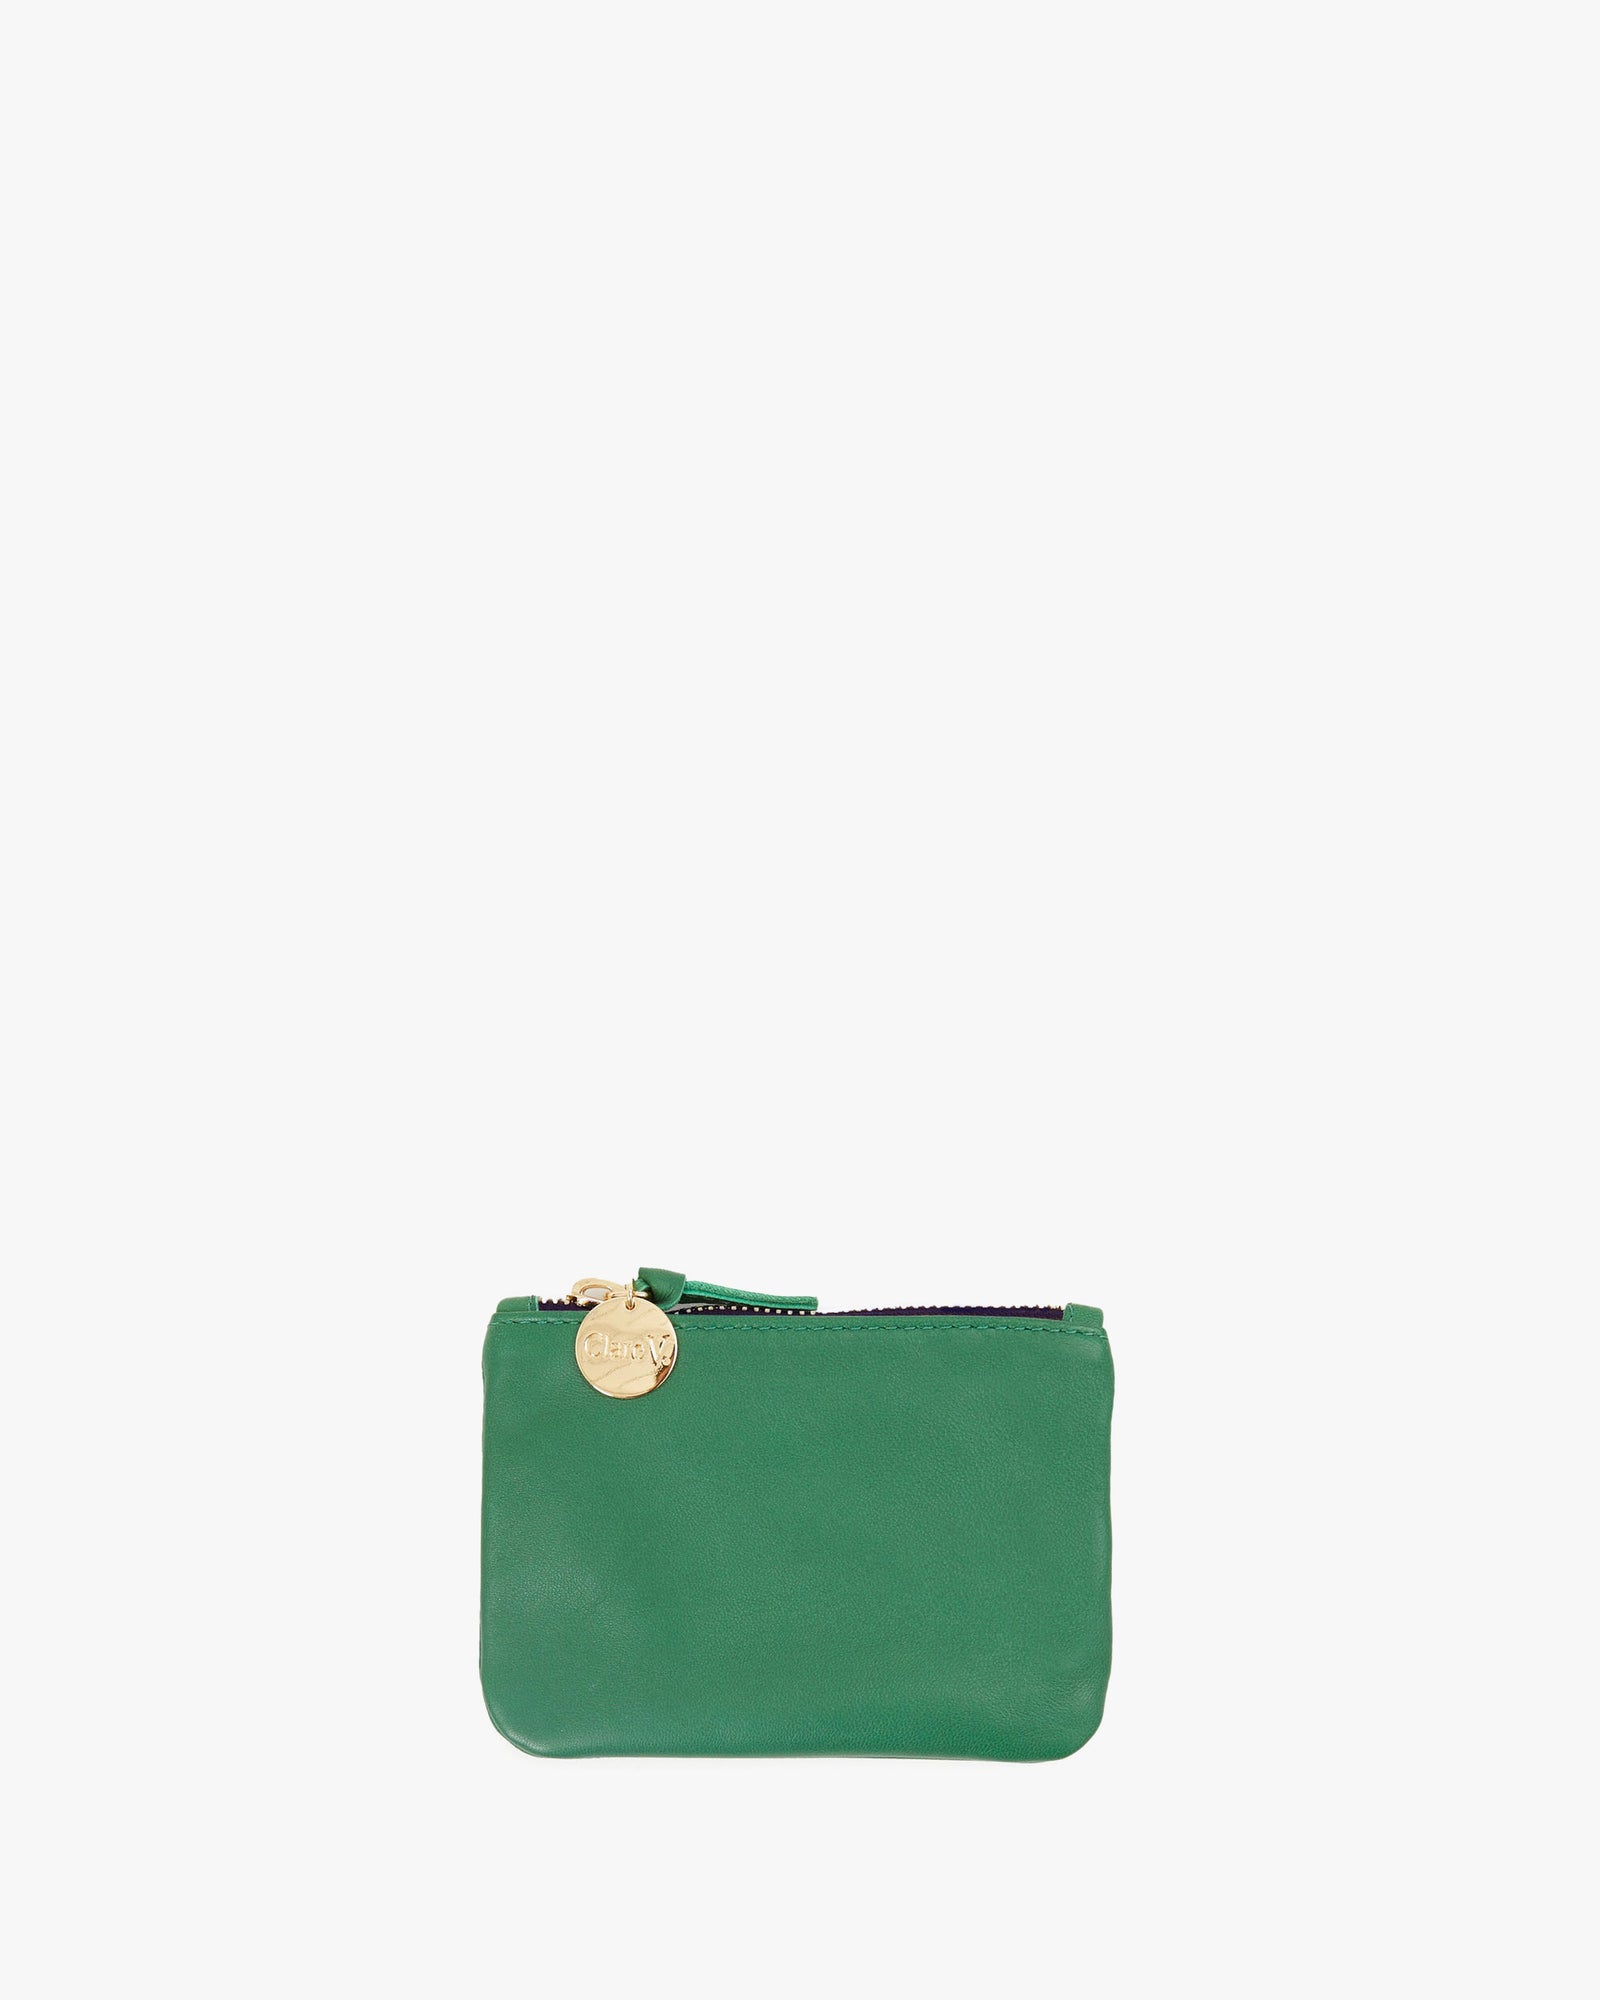 Clare V. Coin Clutch, FYI: This Is the 1 Accessory Brand You'll Want to  Get Your Hands on This Summer